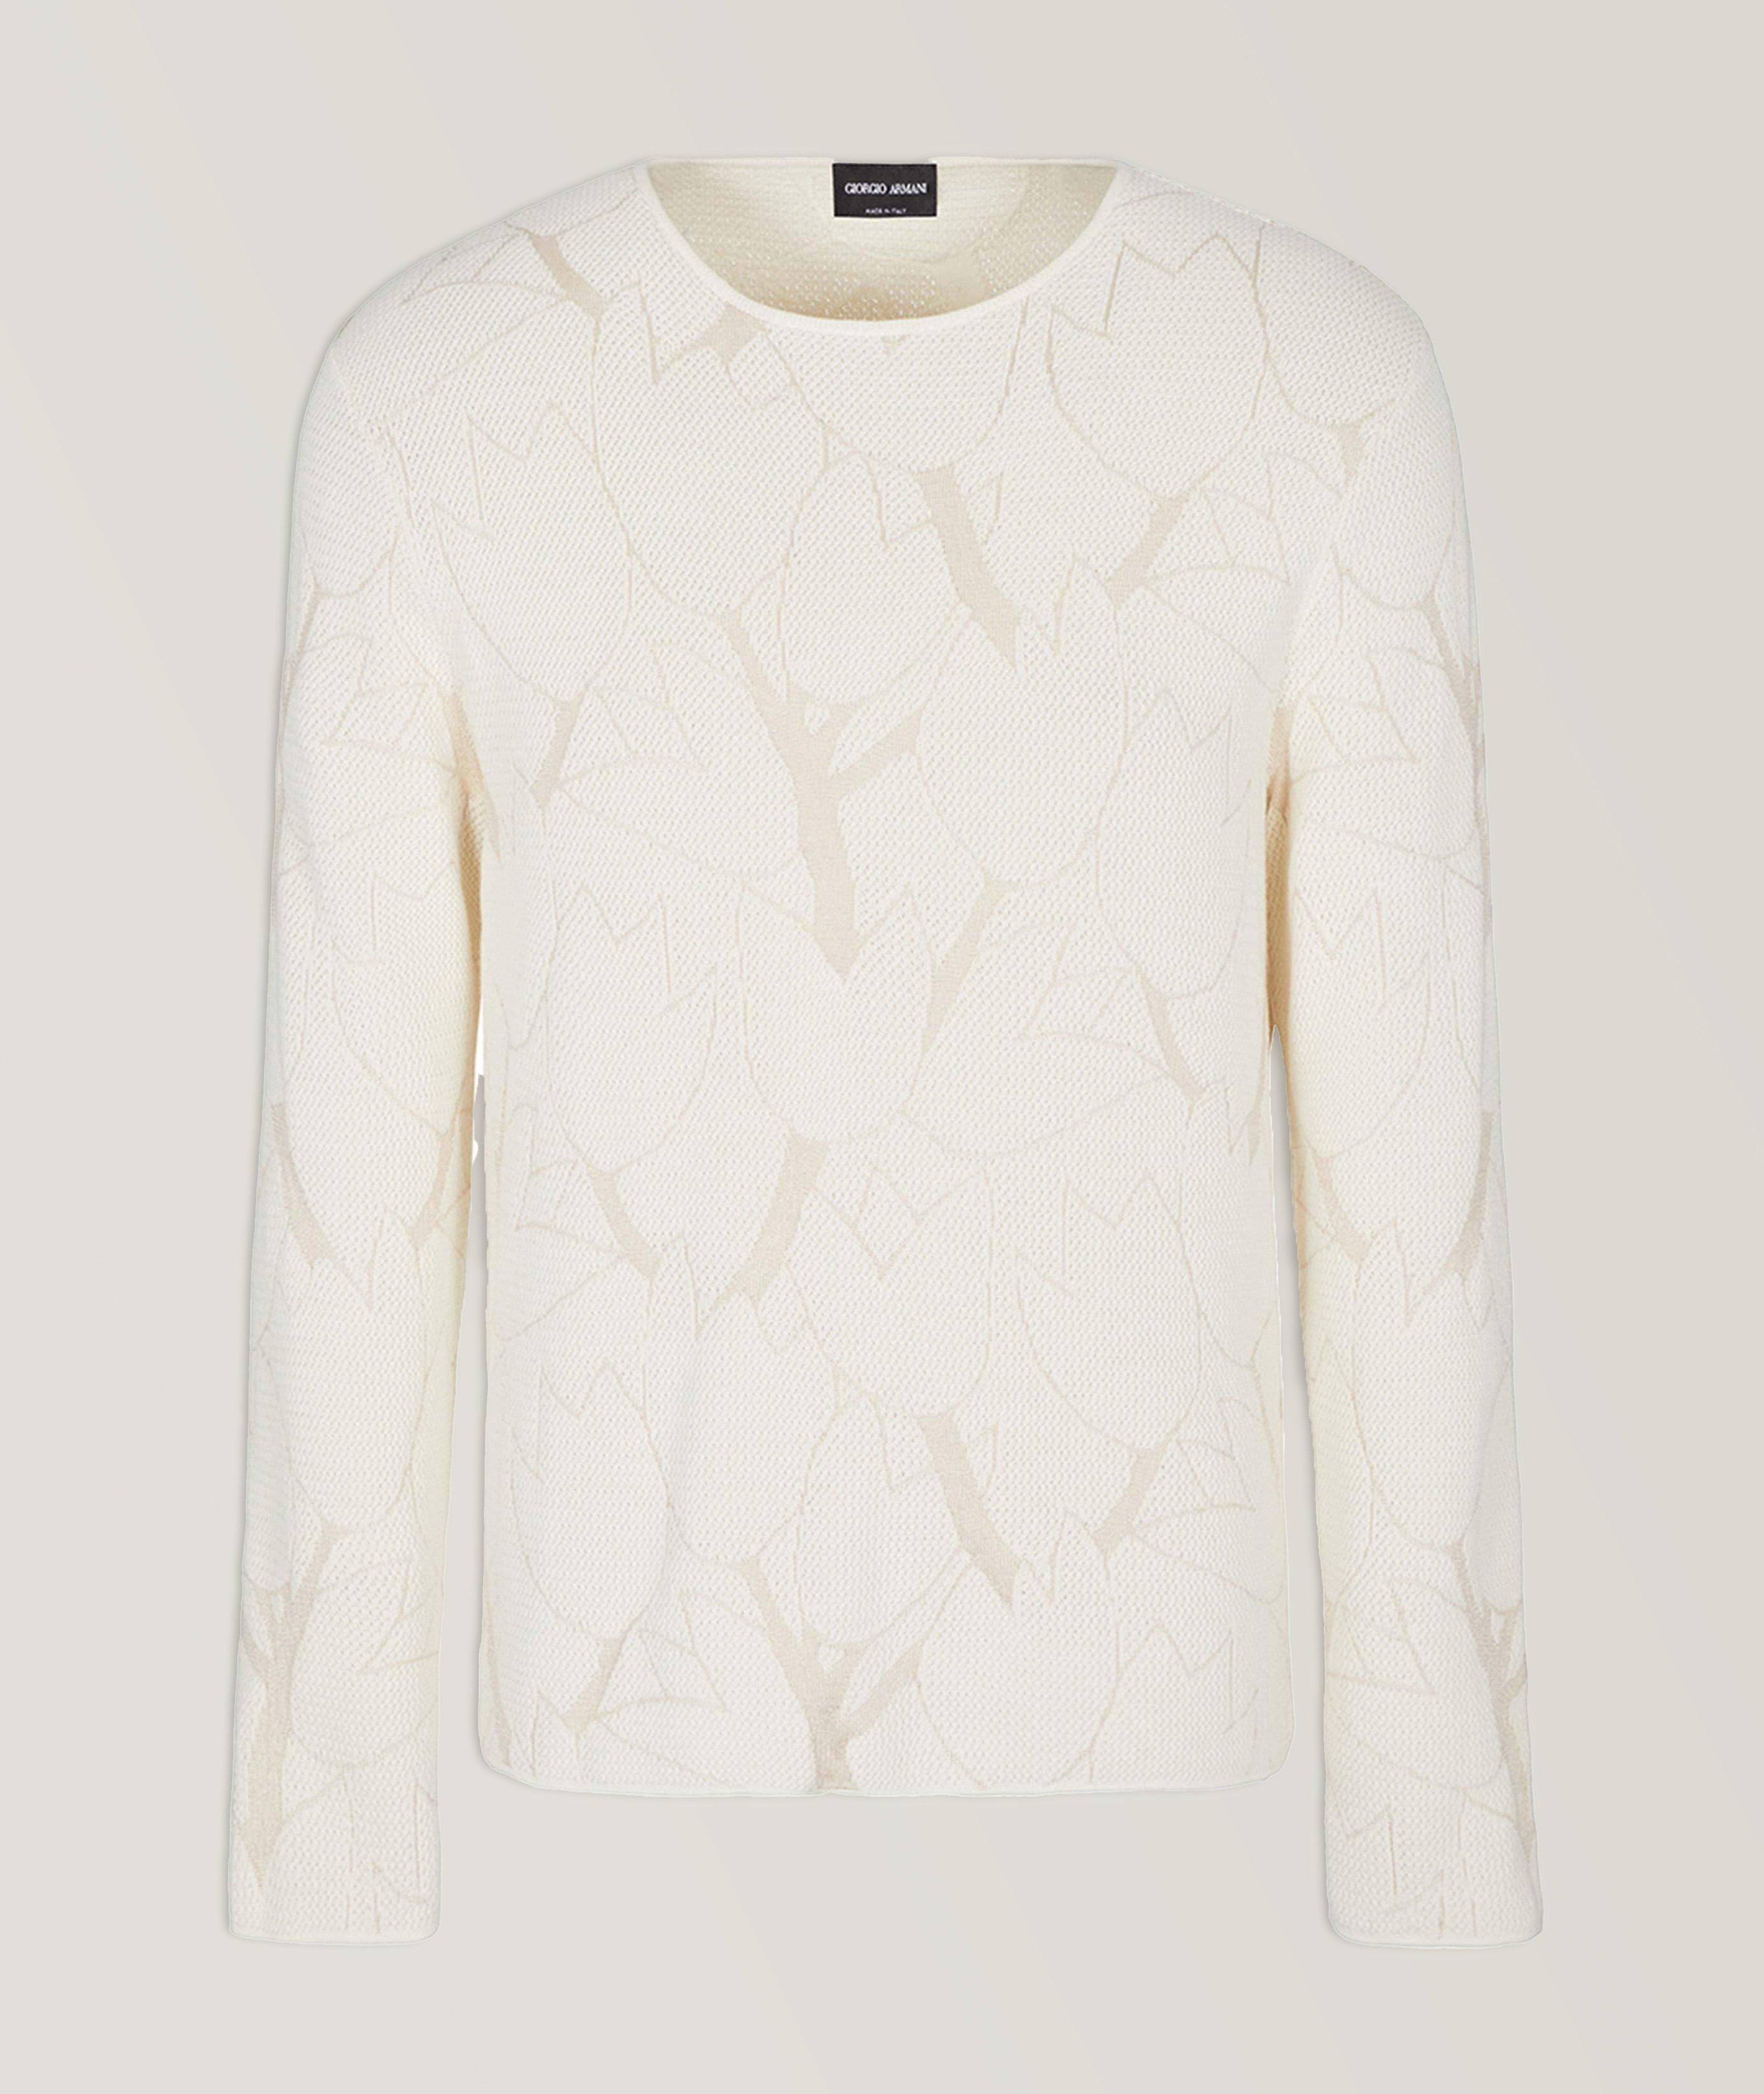 Cotton, Wool-Blend Floral Sweater image 0